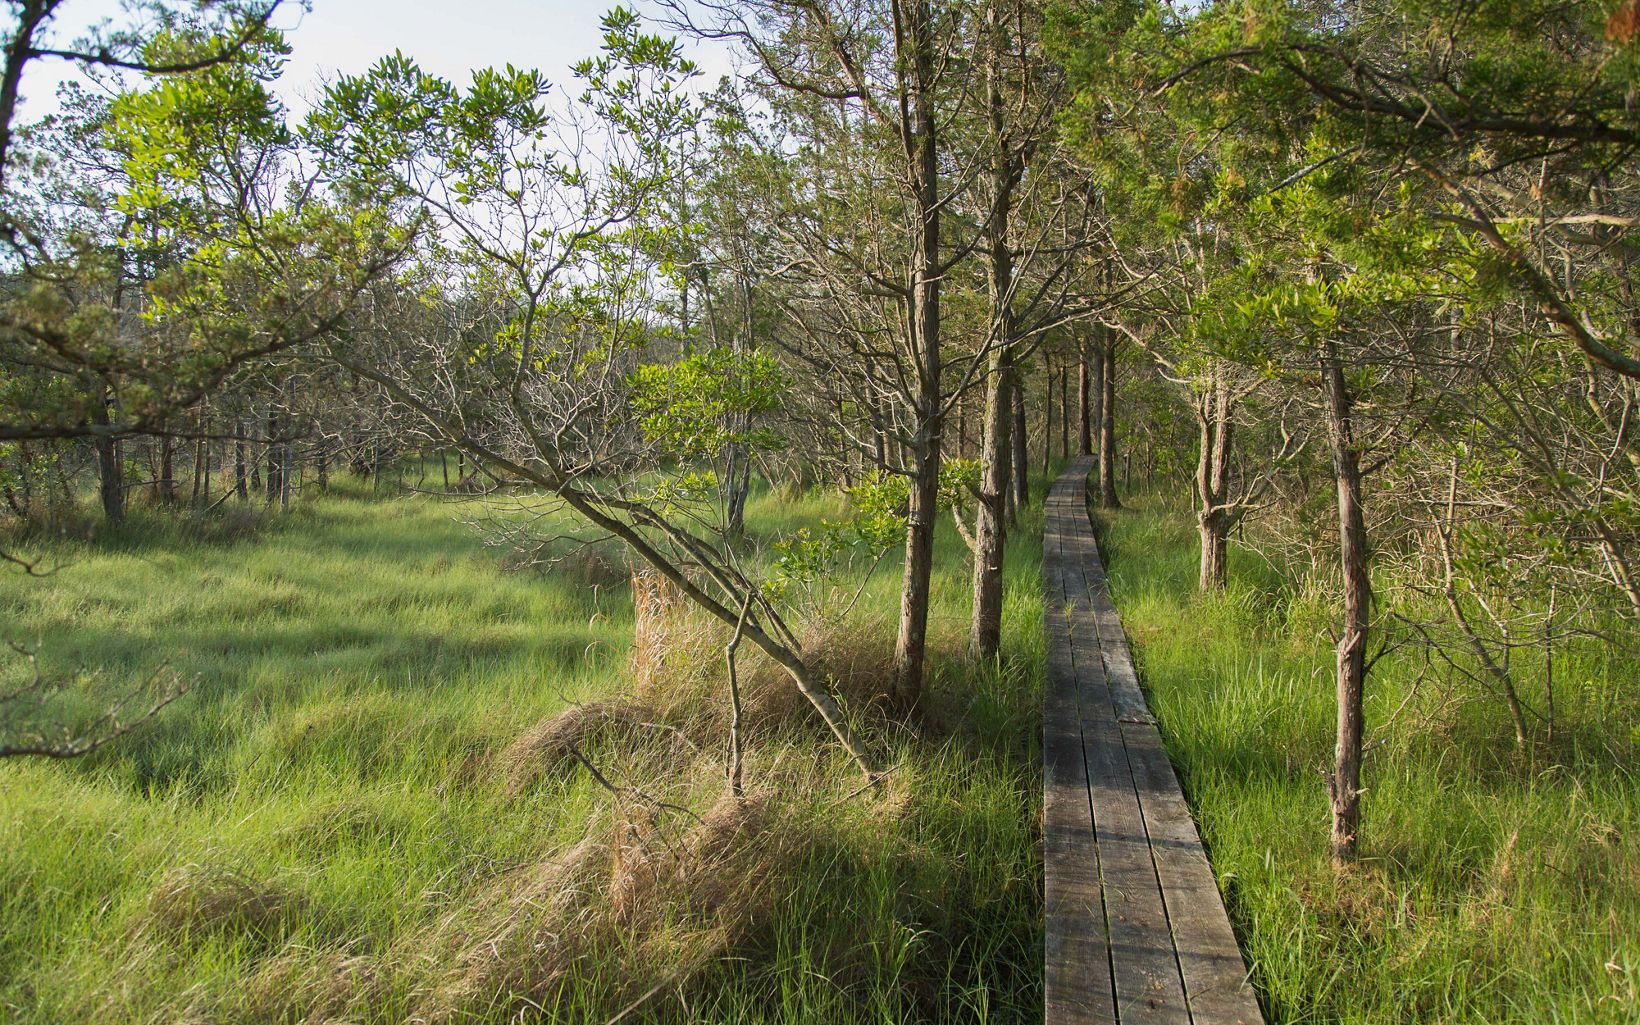 A narrow path built from wooden planks stretches into the distance between a stand of widely spaced trees. Tall grass fills the open space next to the path.